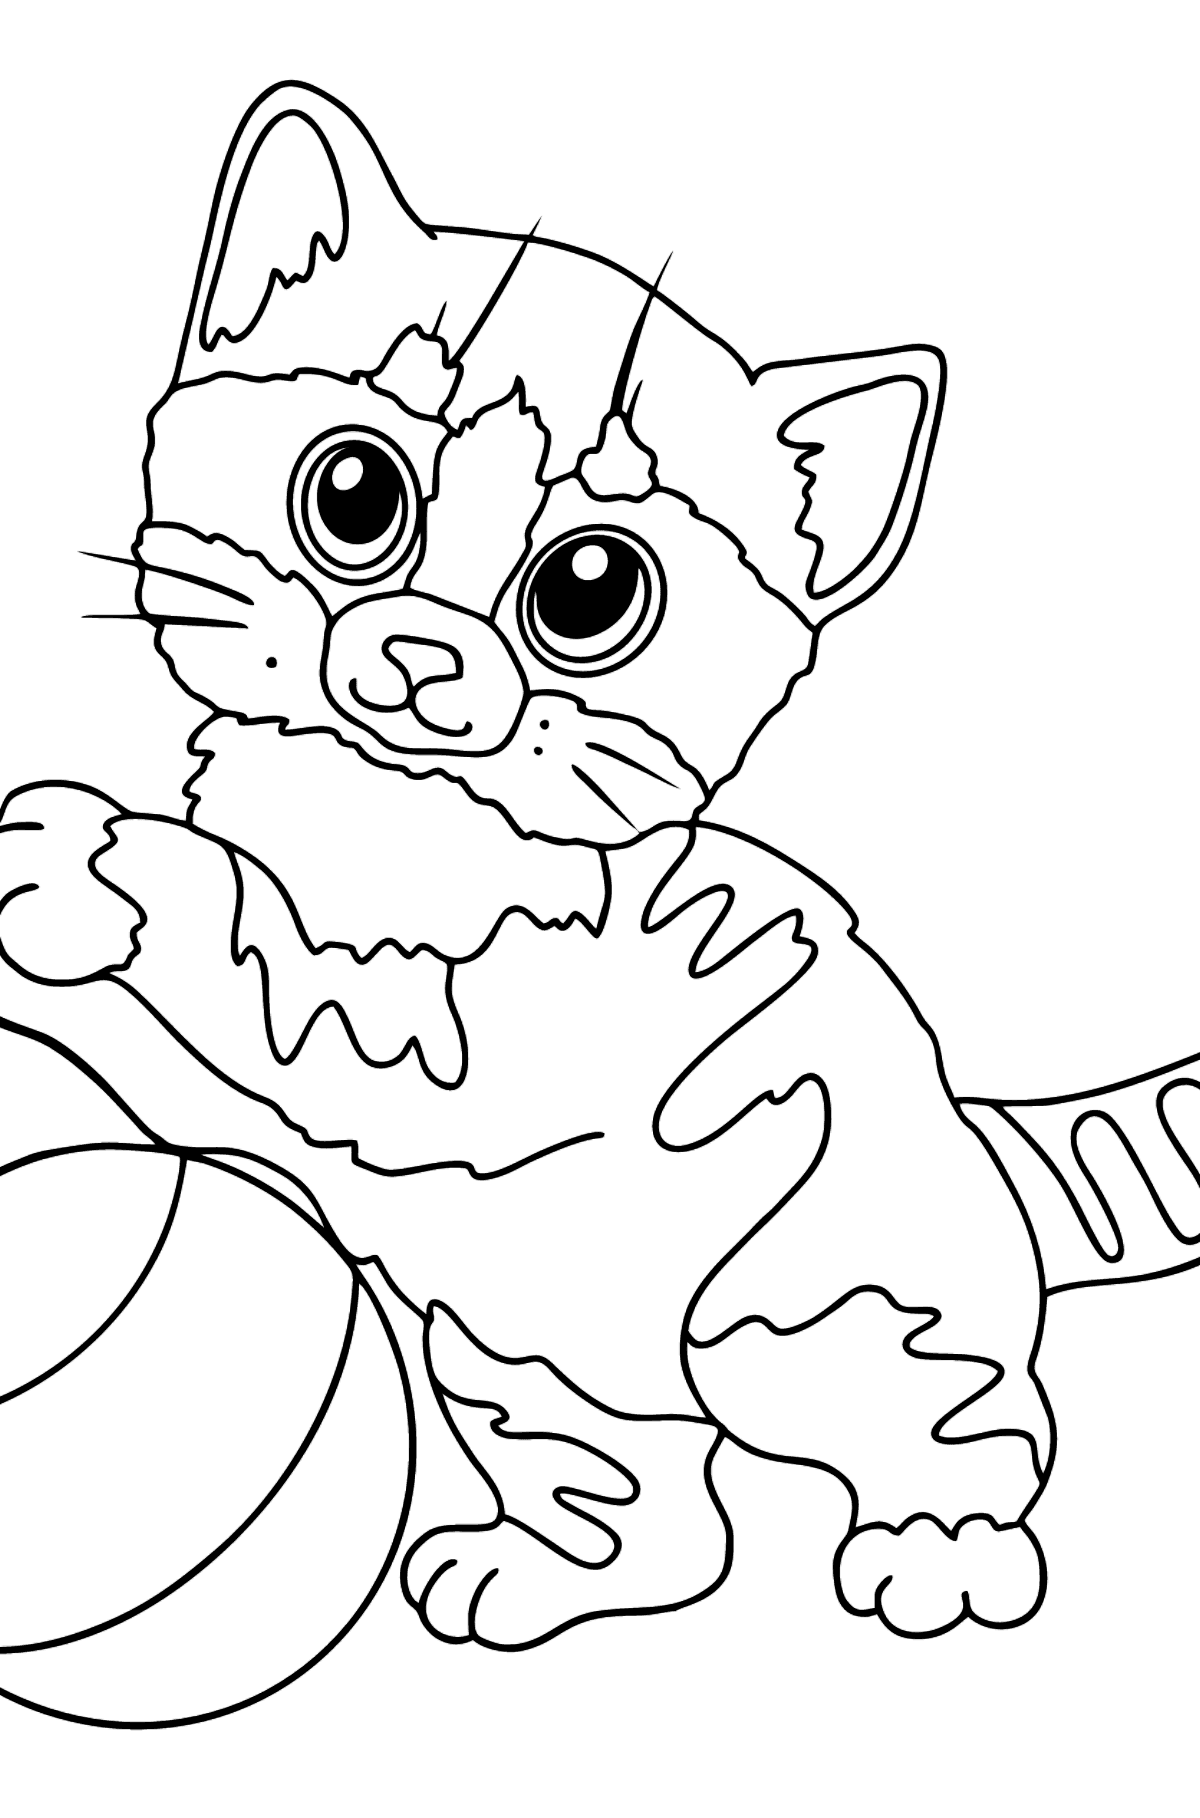 Funny Kitten coloring page - Coloring Pages for Kids